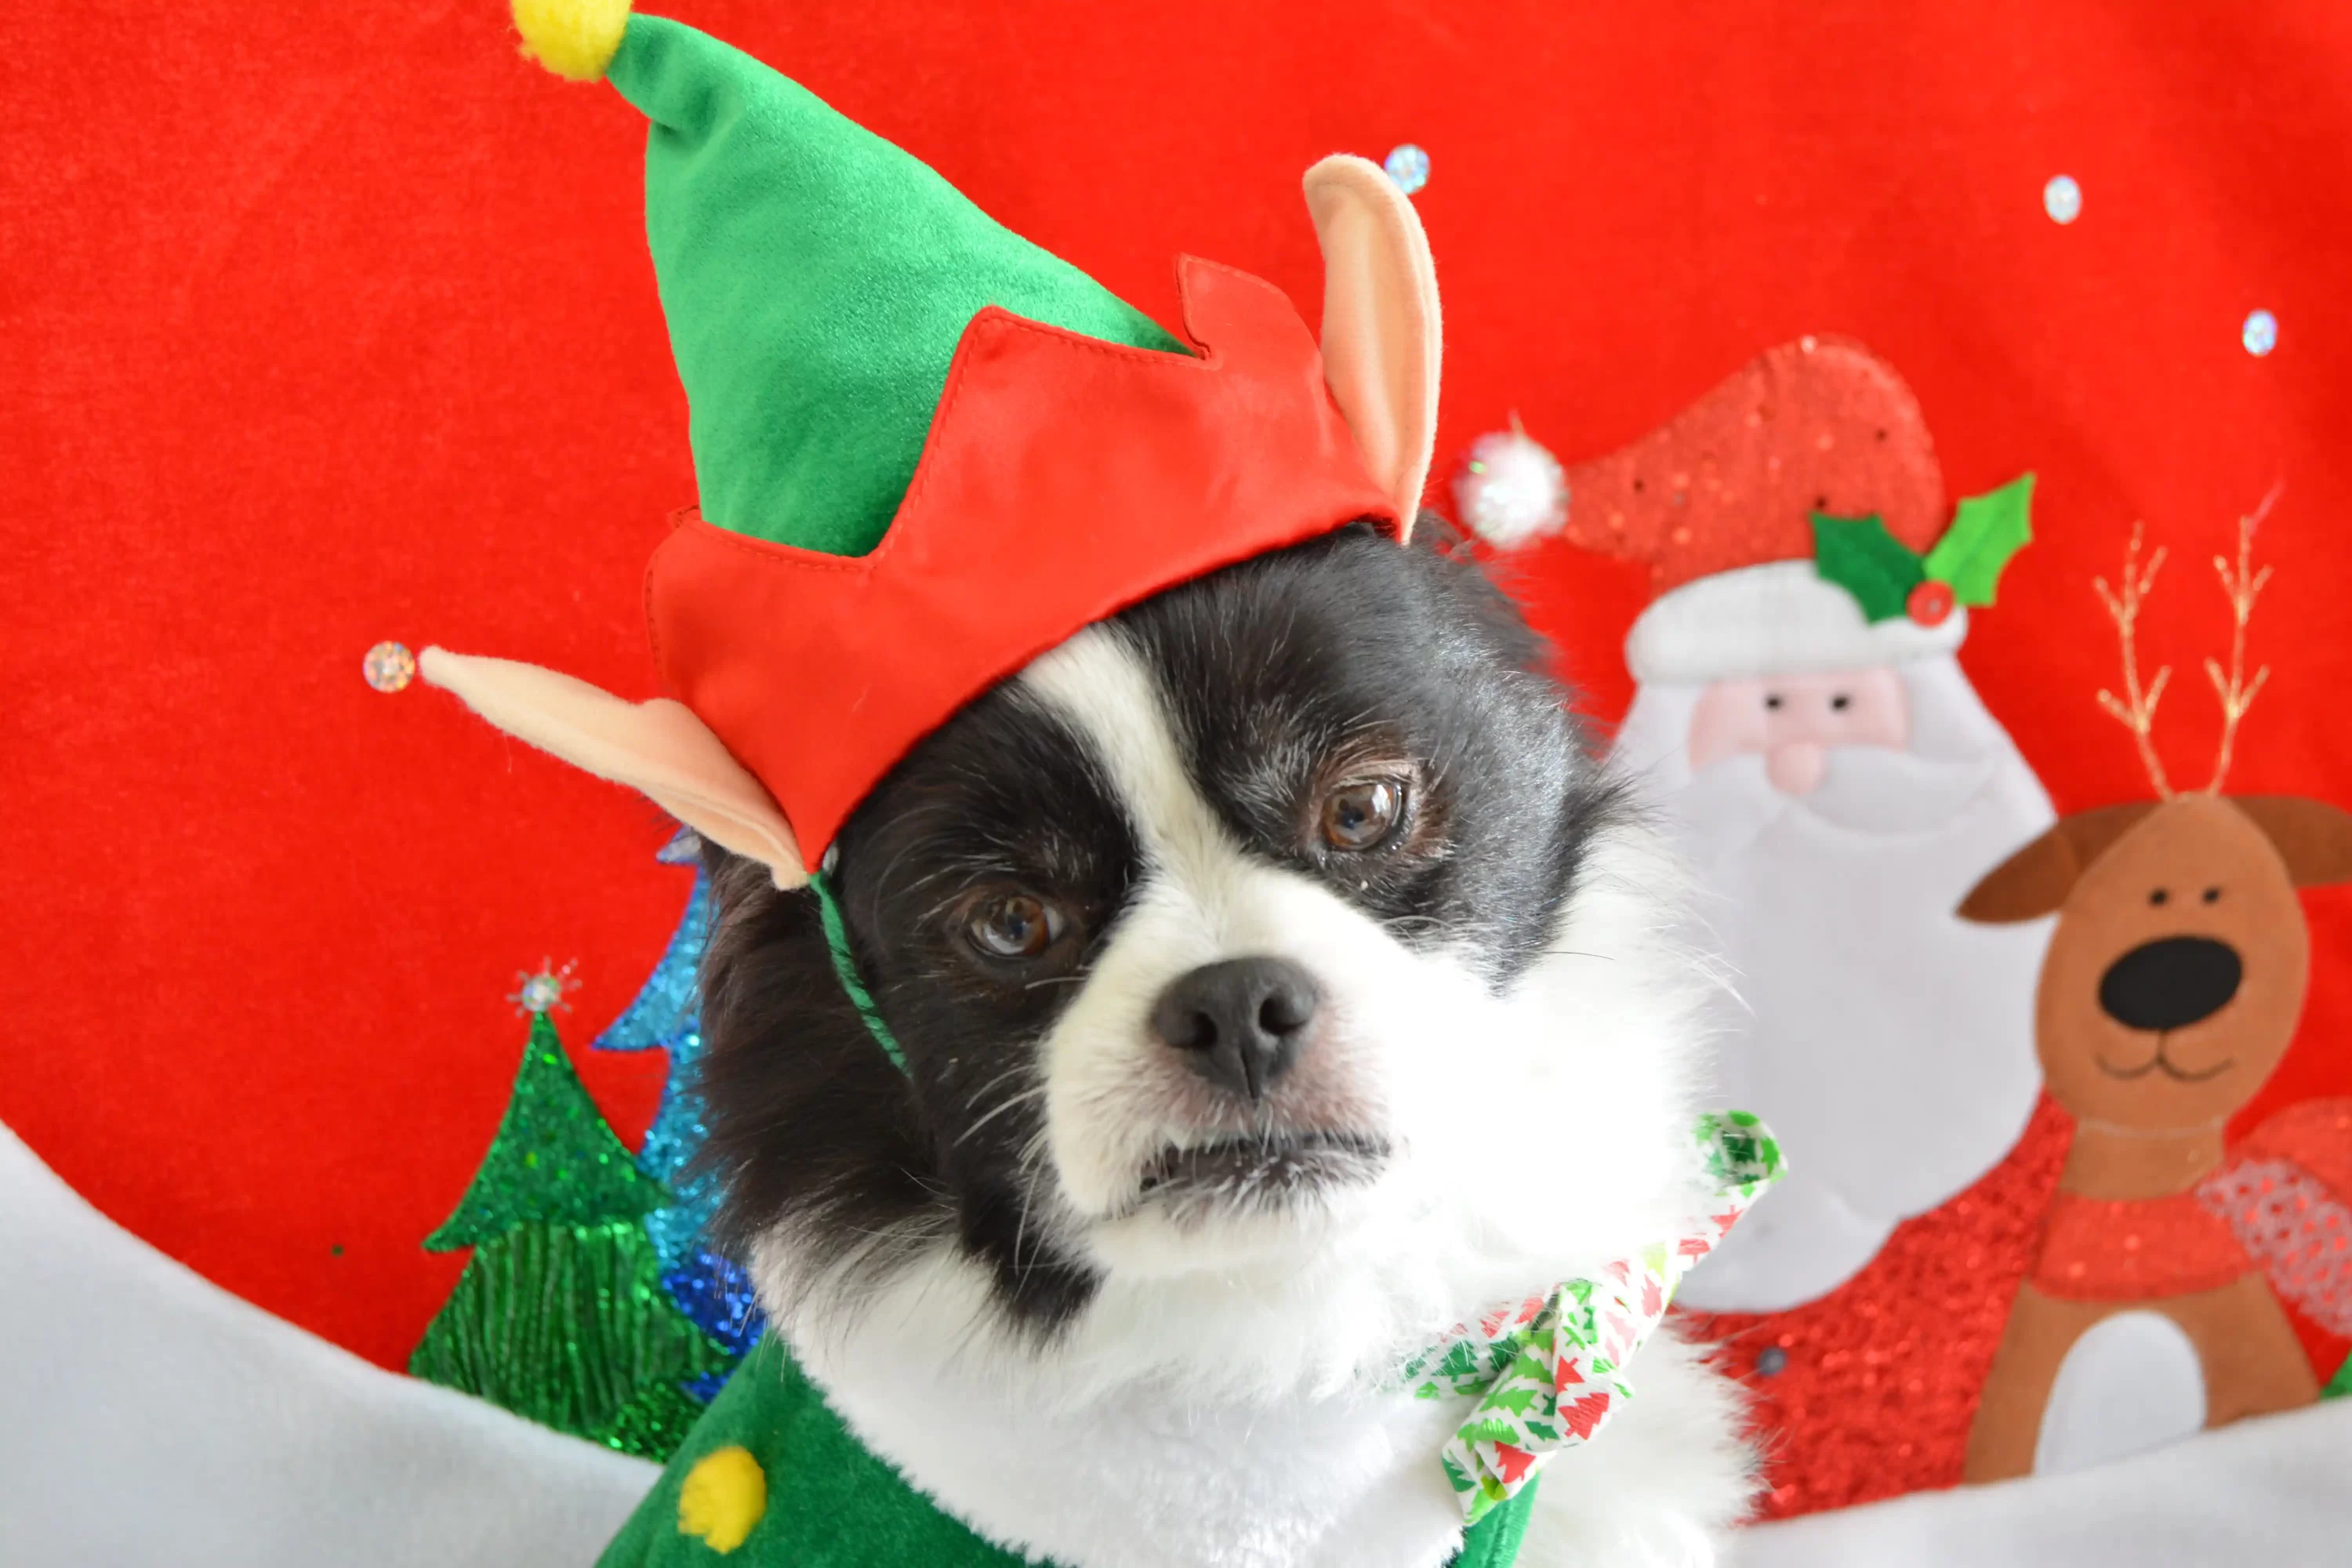 Dog with elf ears. Christmas pet costumes